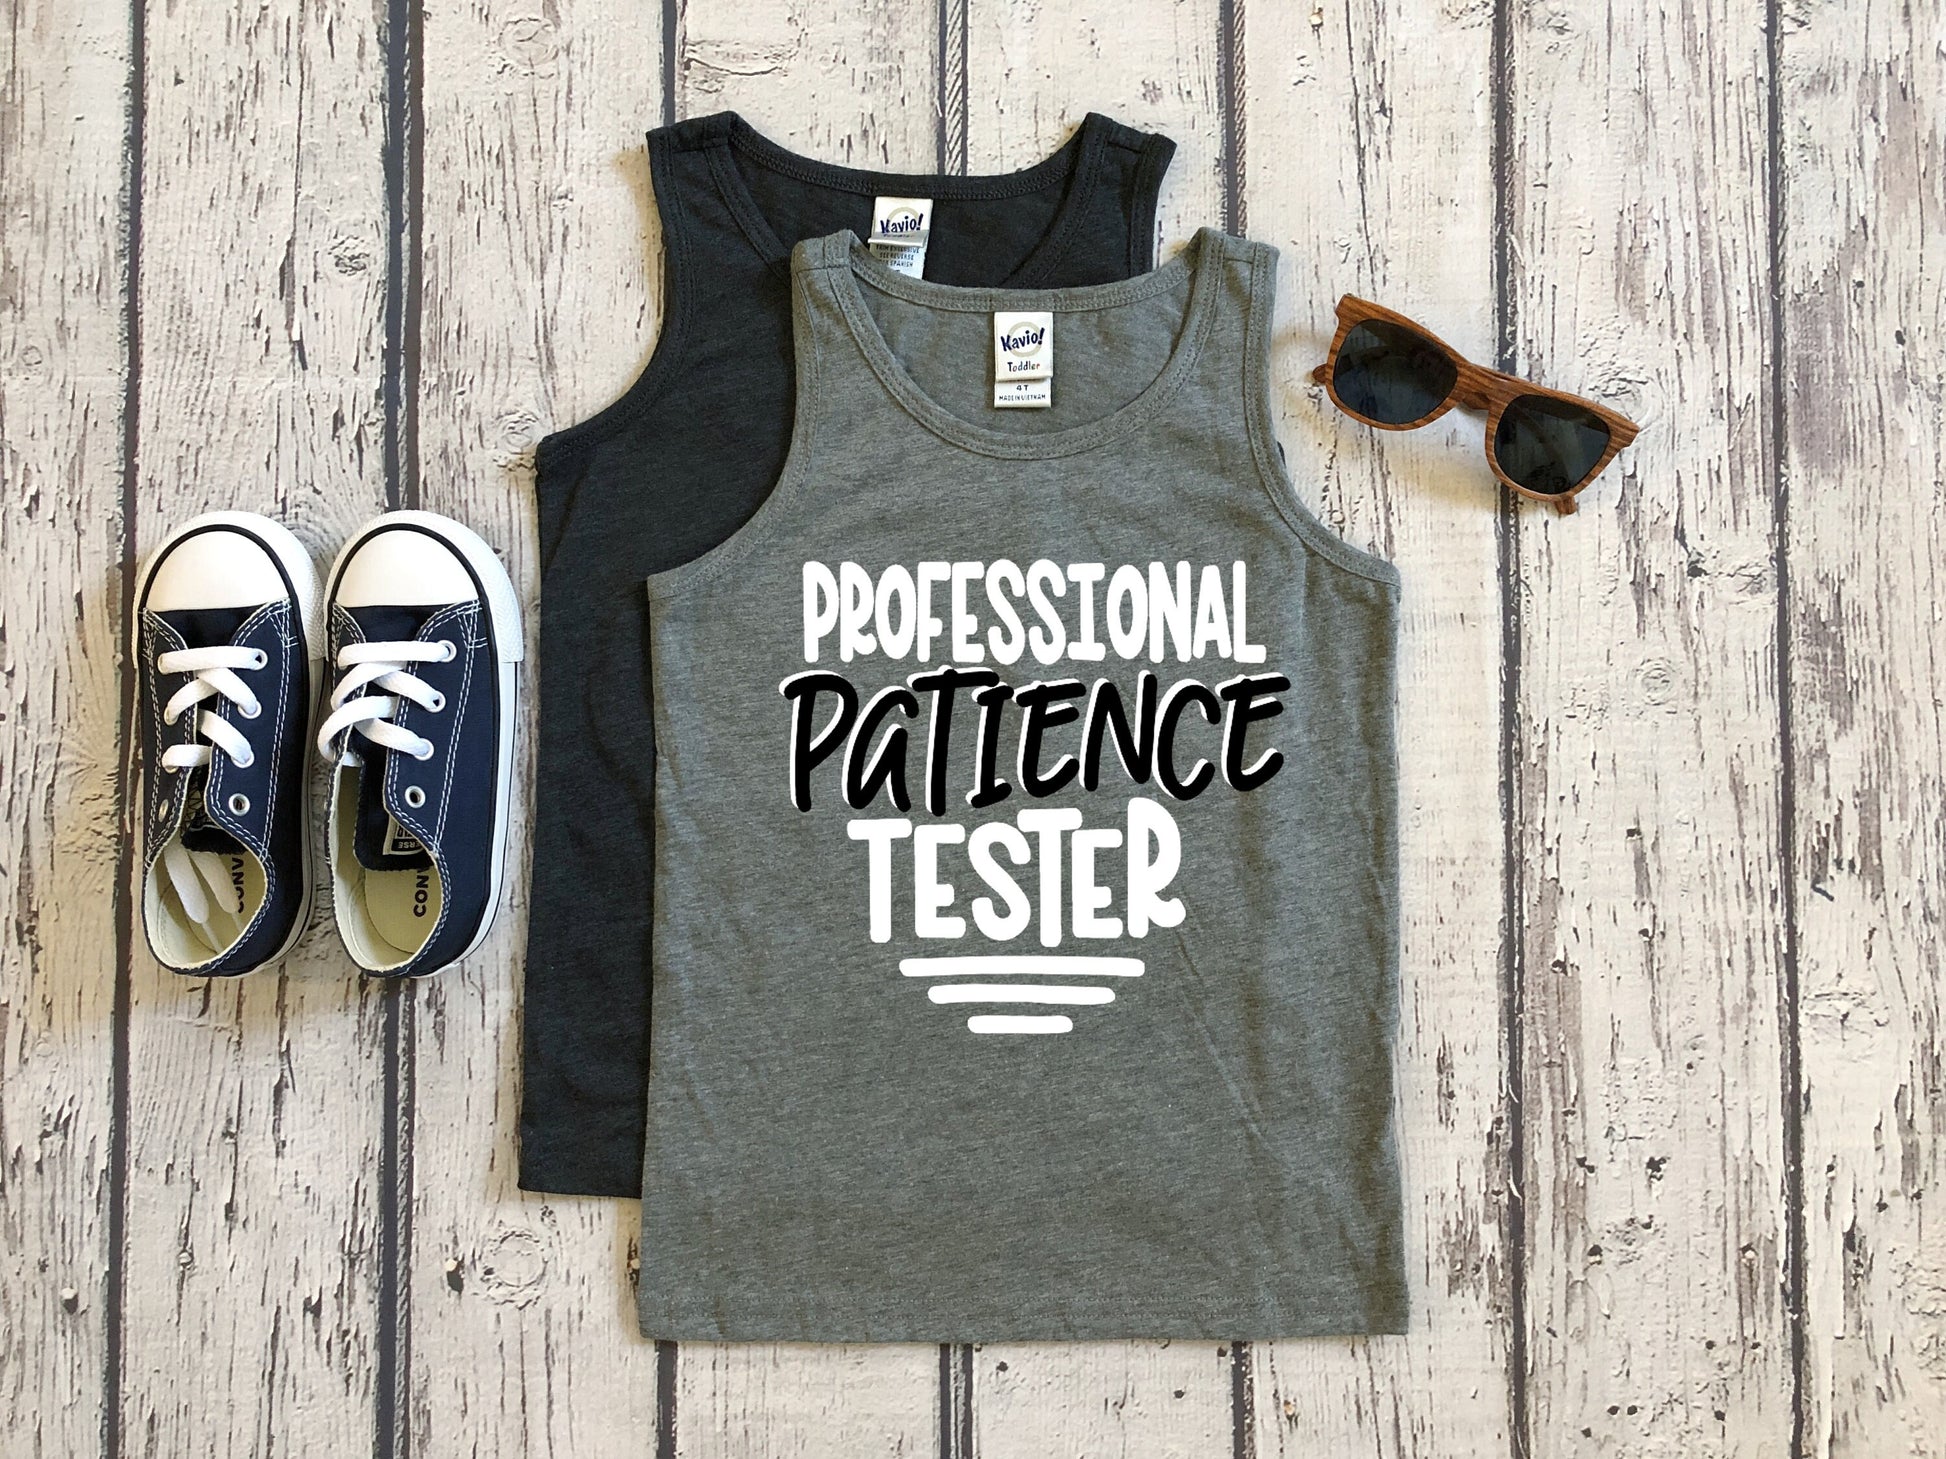 Professional Patience Tester Infant or Toddler Tank Top - I'm the Boss - Funny Toddler Shirt - Tiny Dictator - Mommy Needs Wine